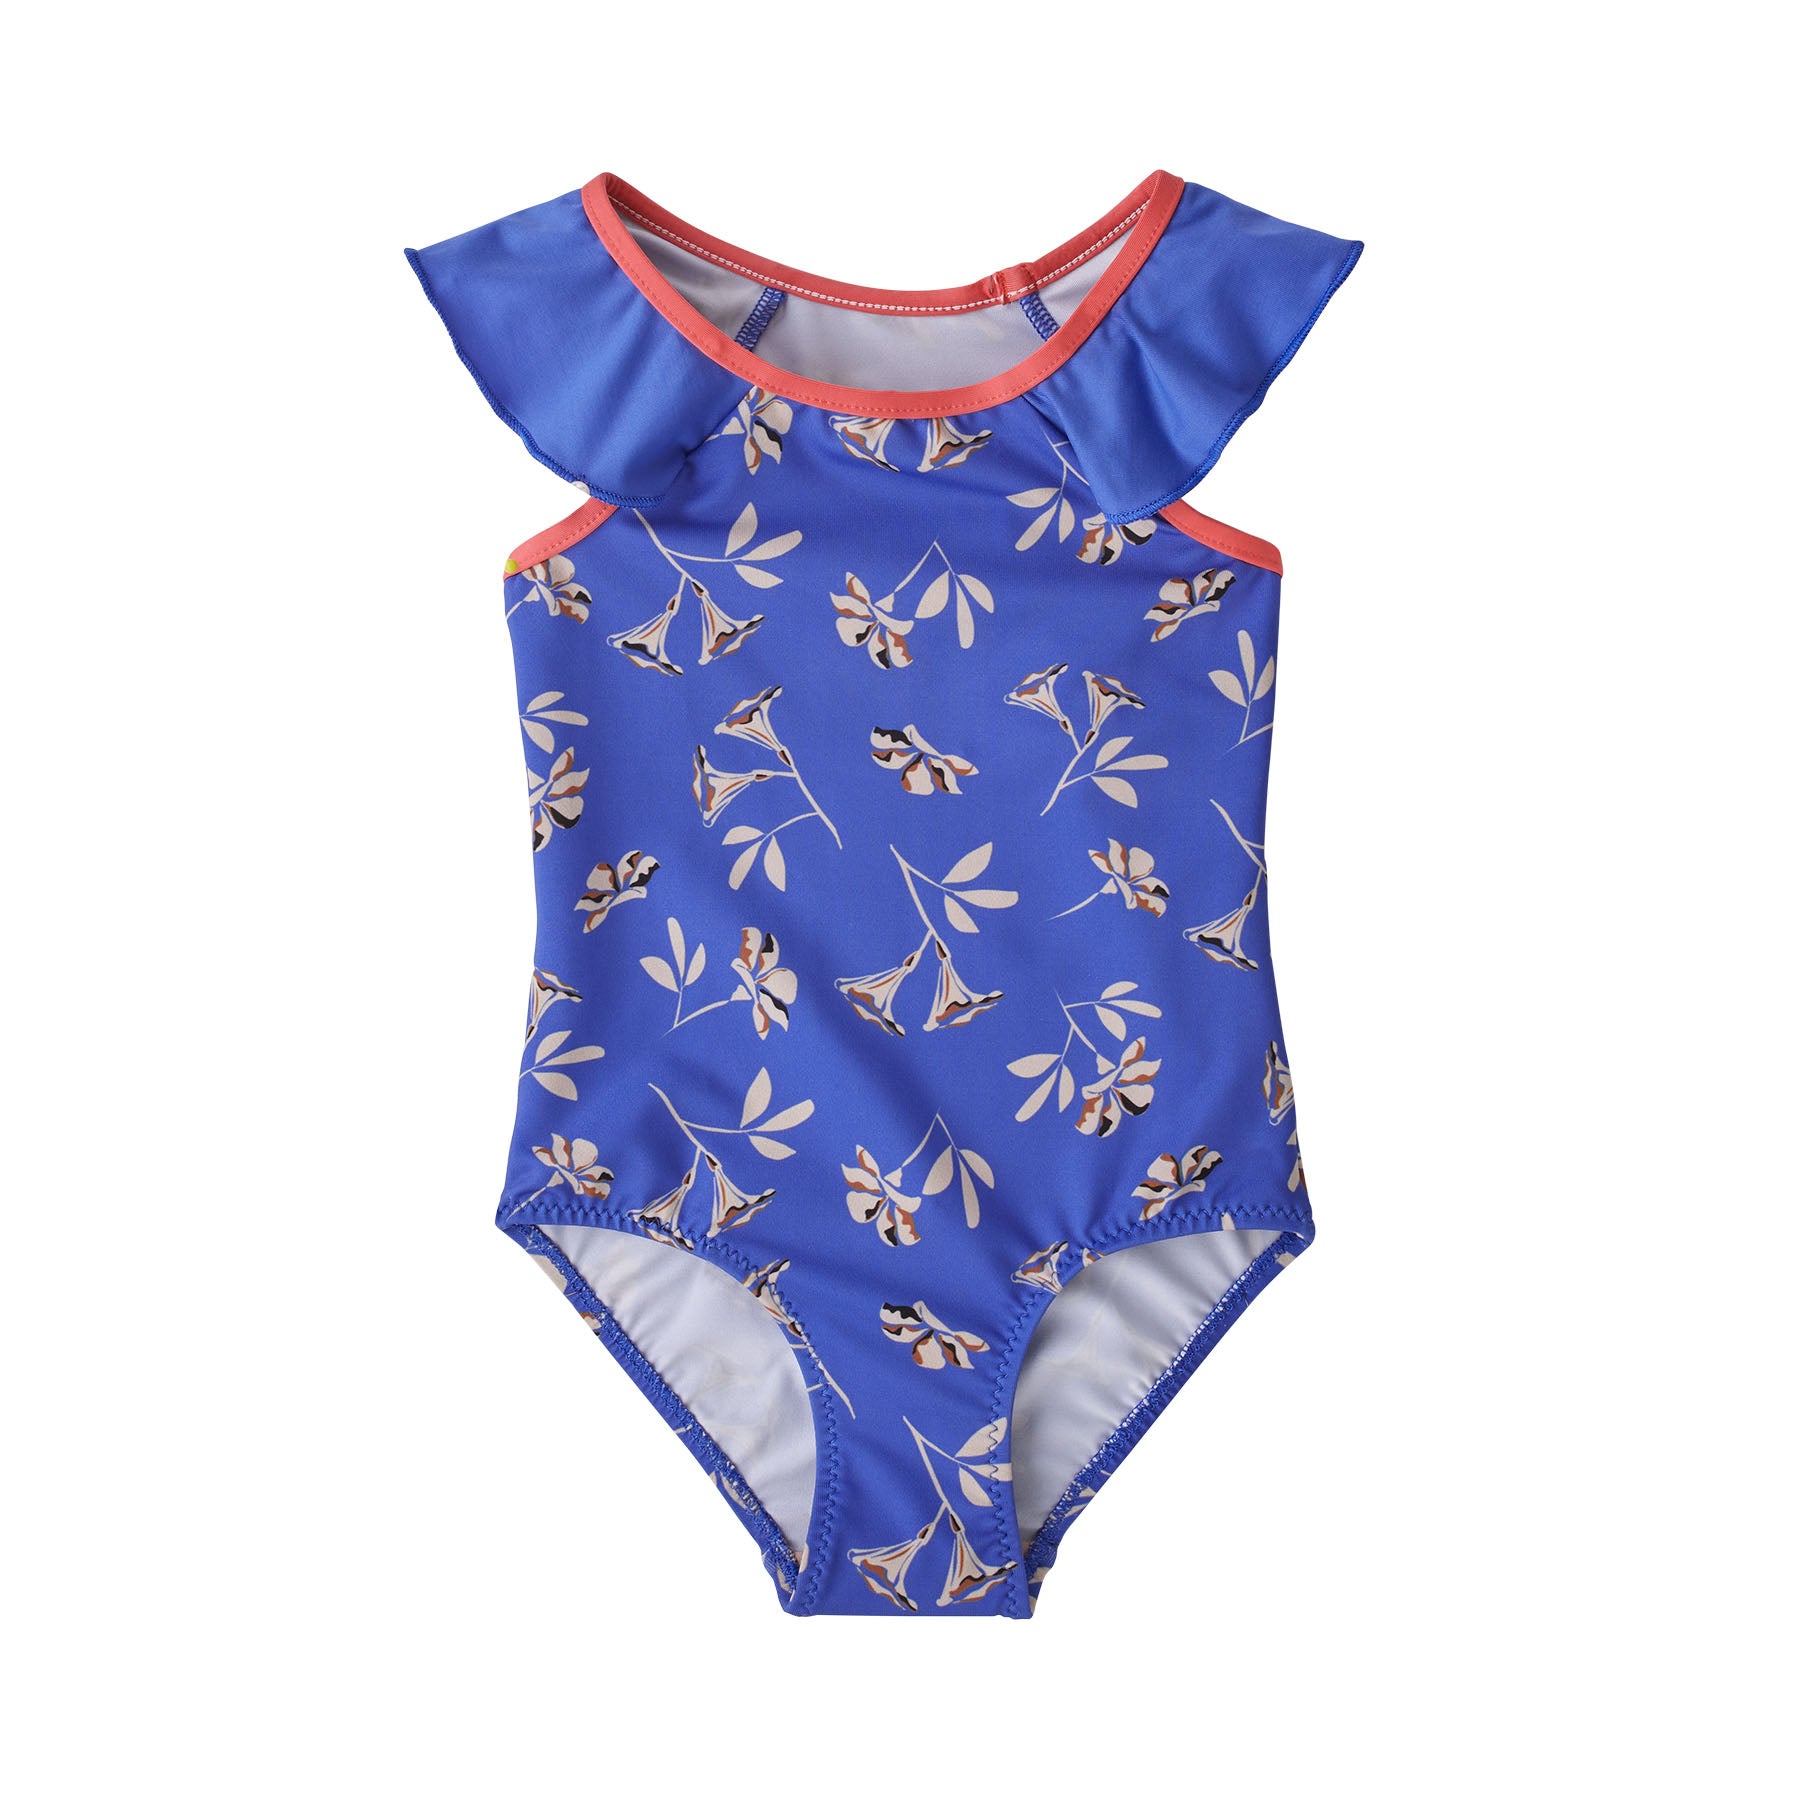 Patagonia Baby Water Sprout One-Piece Swimsuit - Spring 2022